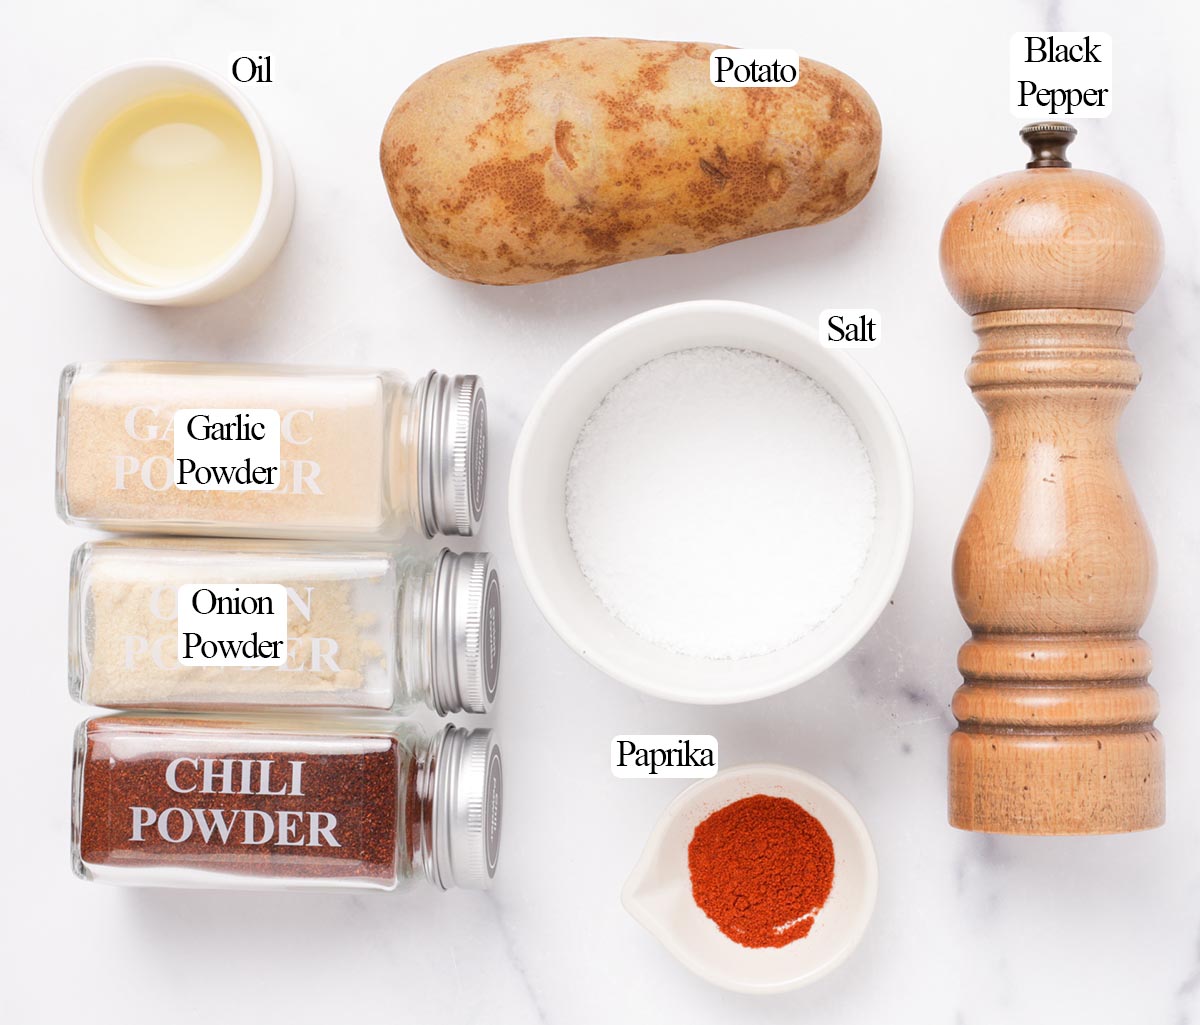 Ingredients for air fryer potato wedges.